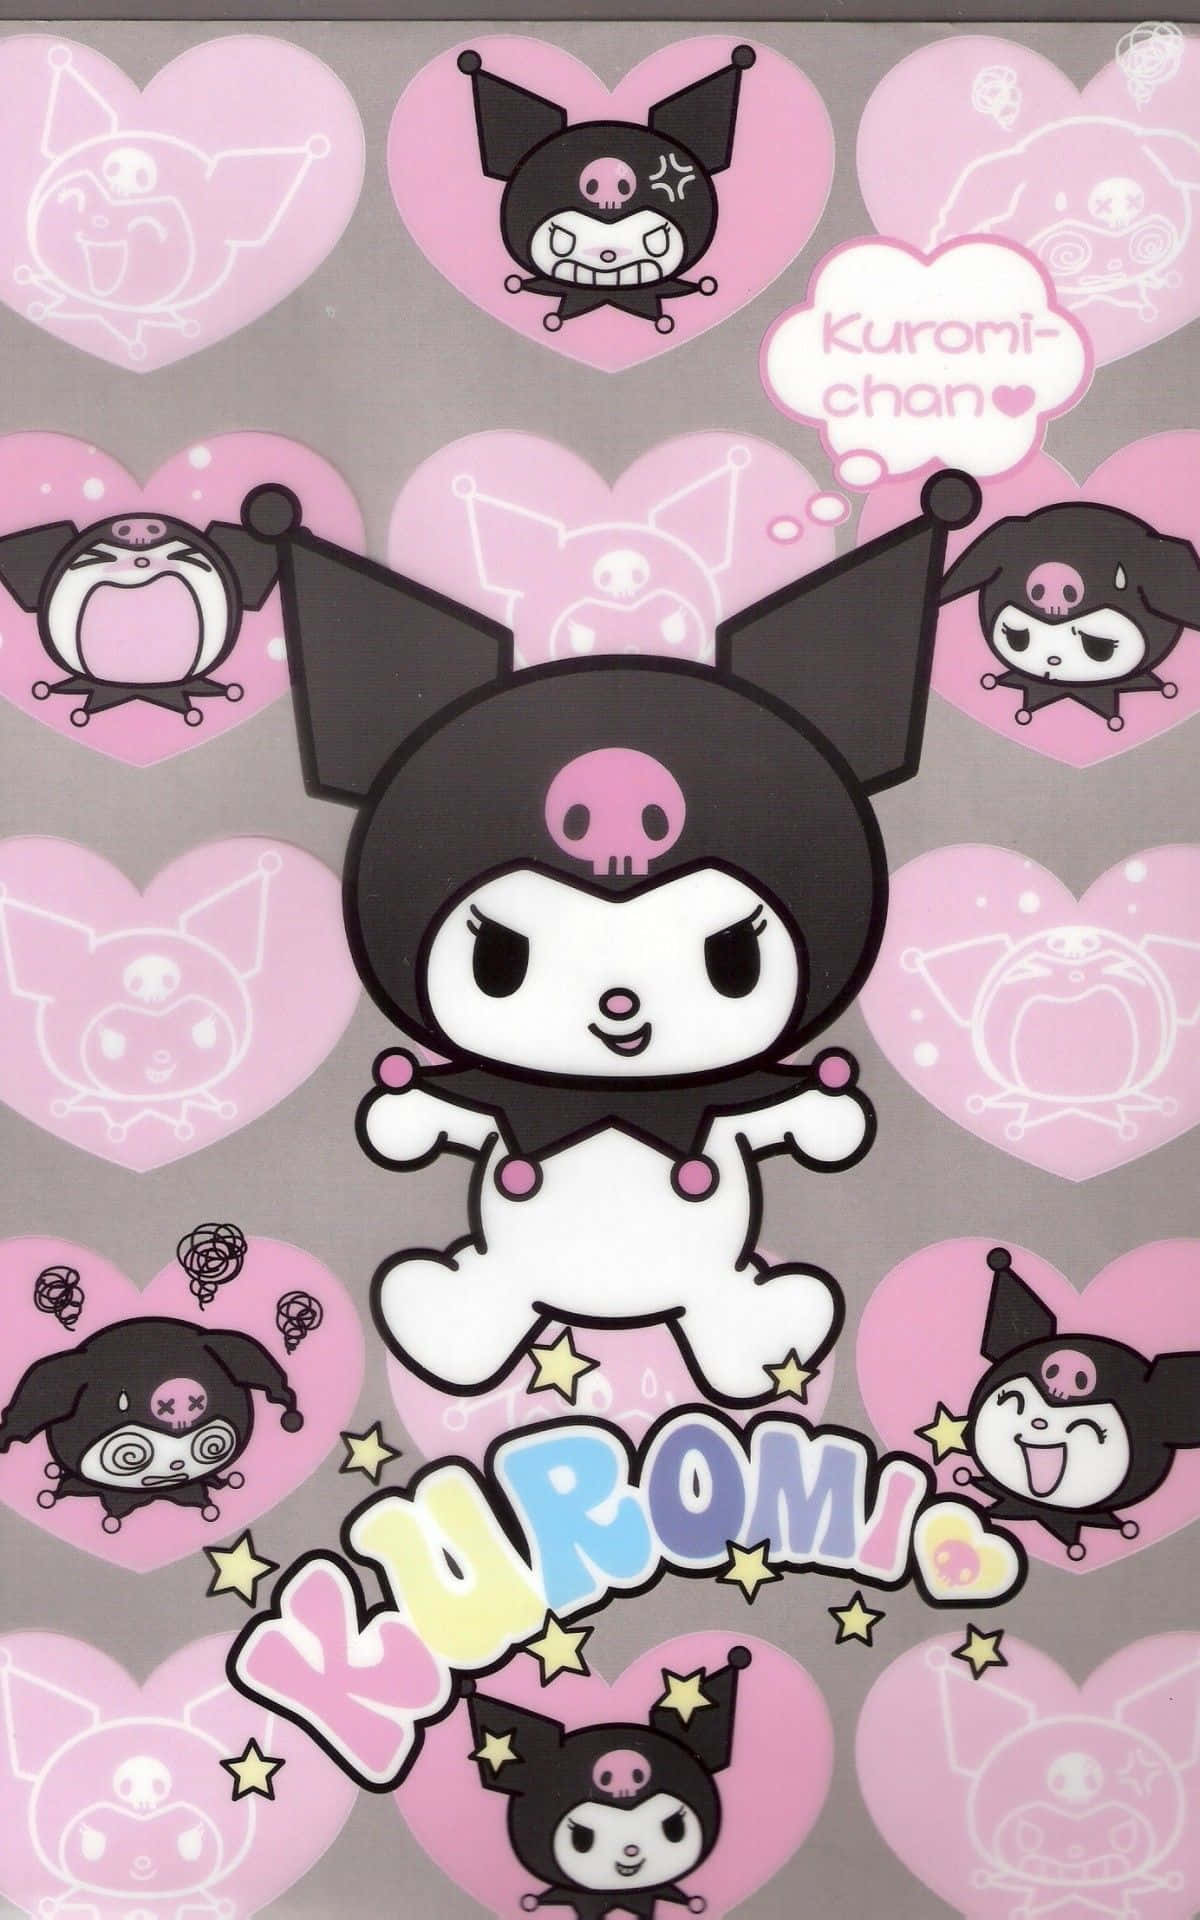 Enjoy your Kuromi Iphone, the perfect choice for those who love the adorable Hello Kitty character. Wallpaper